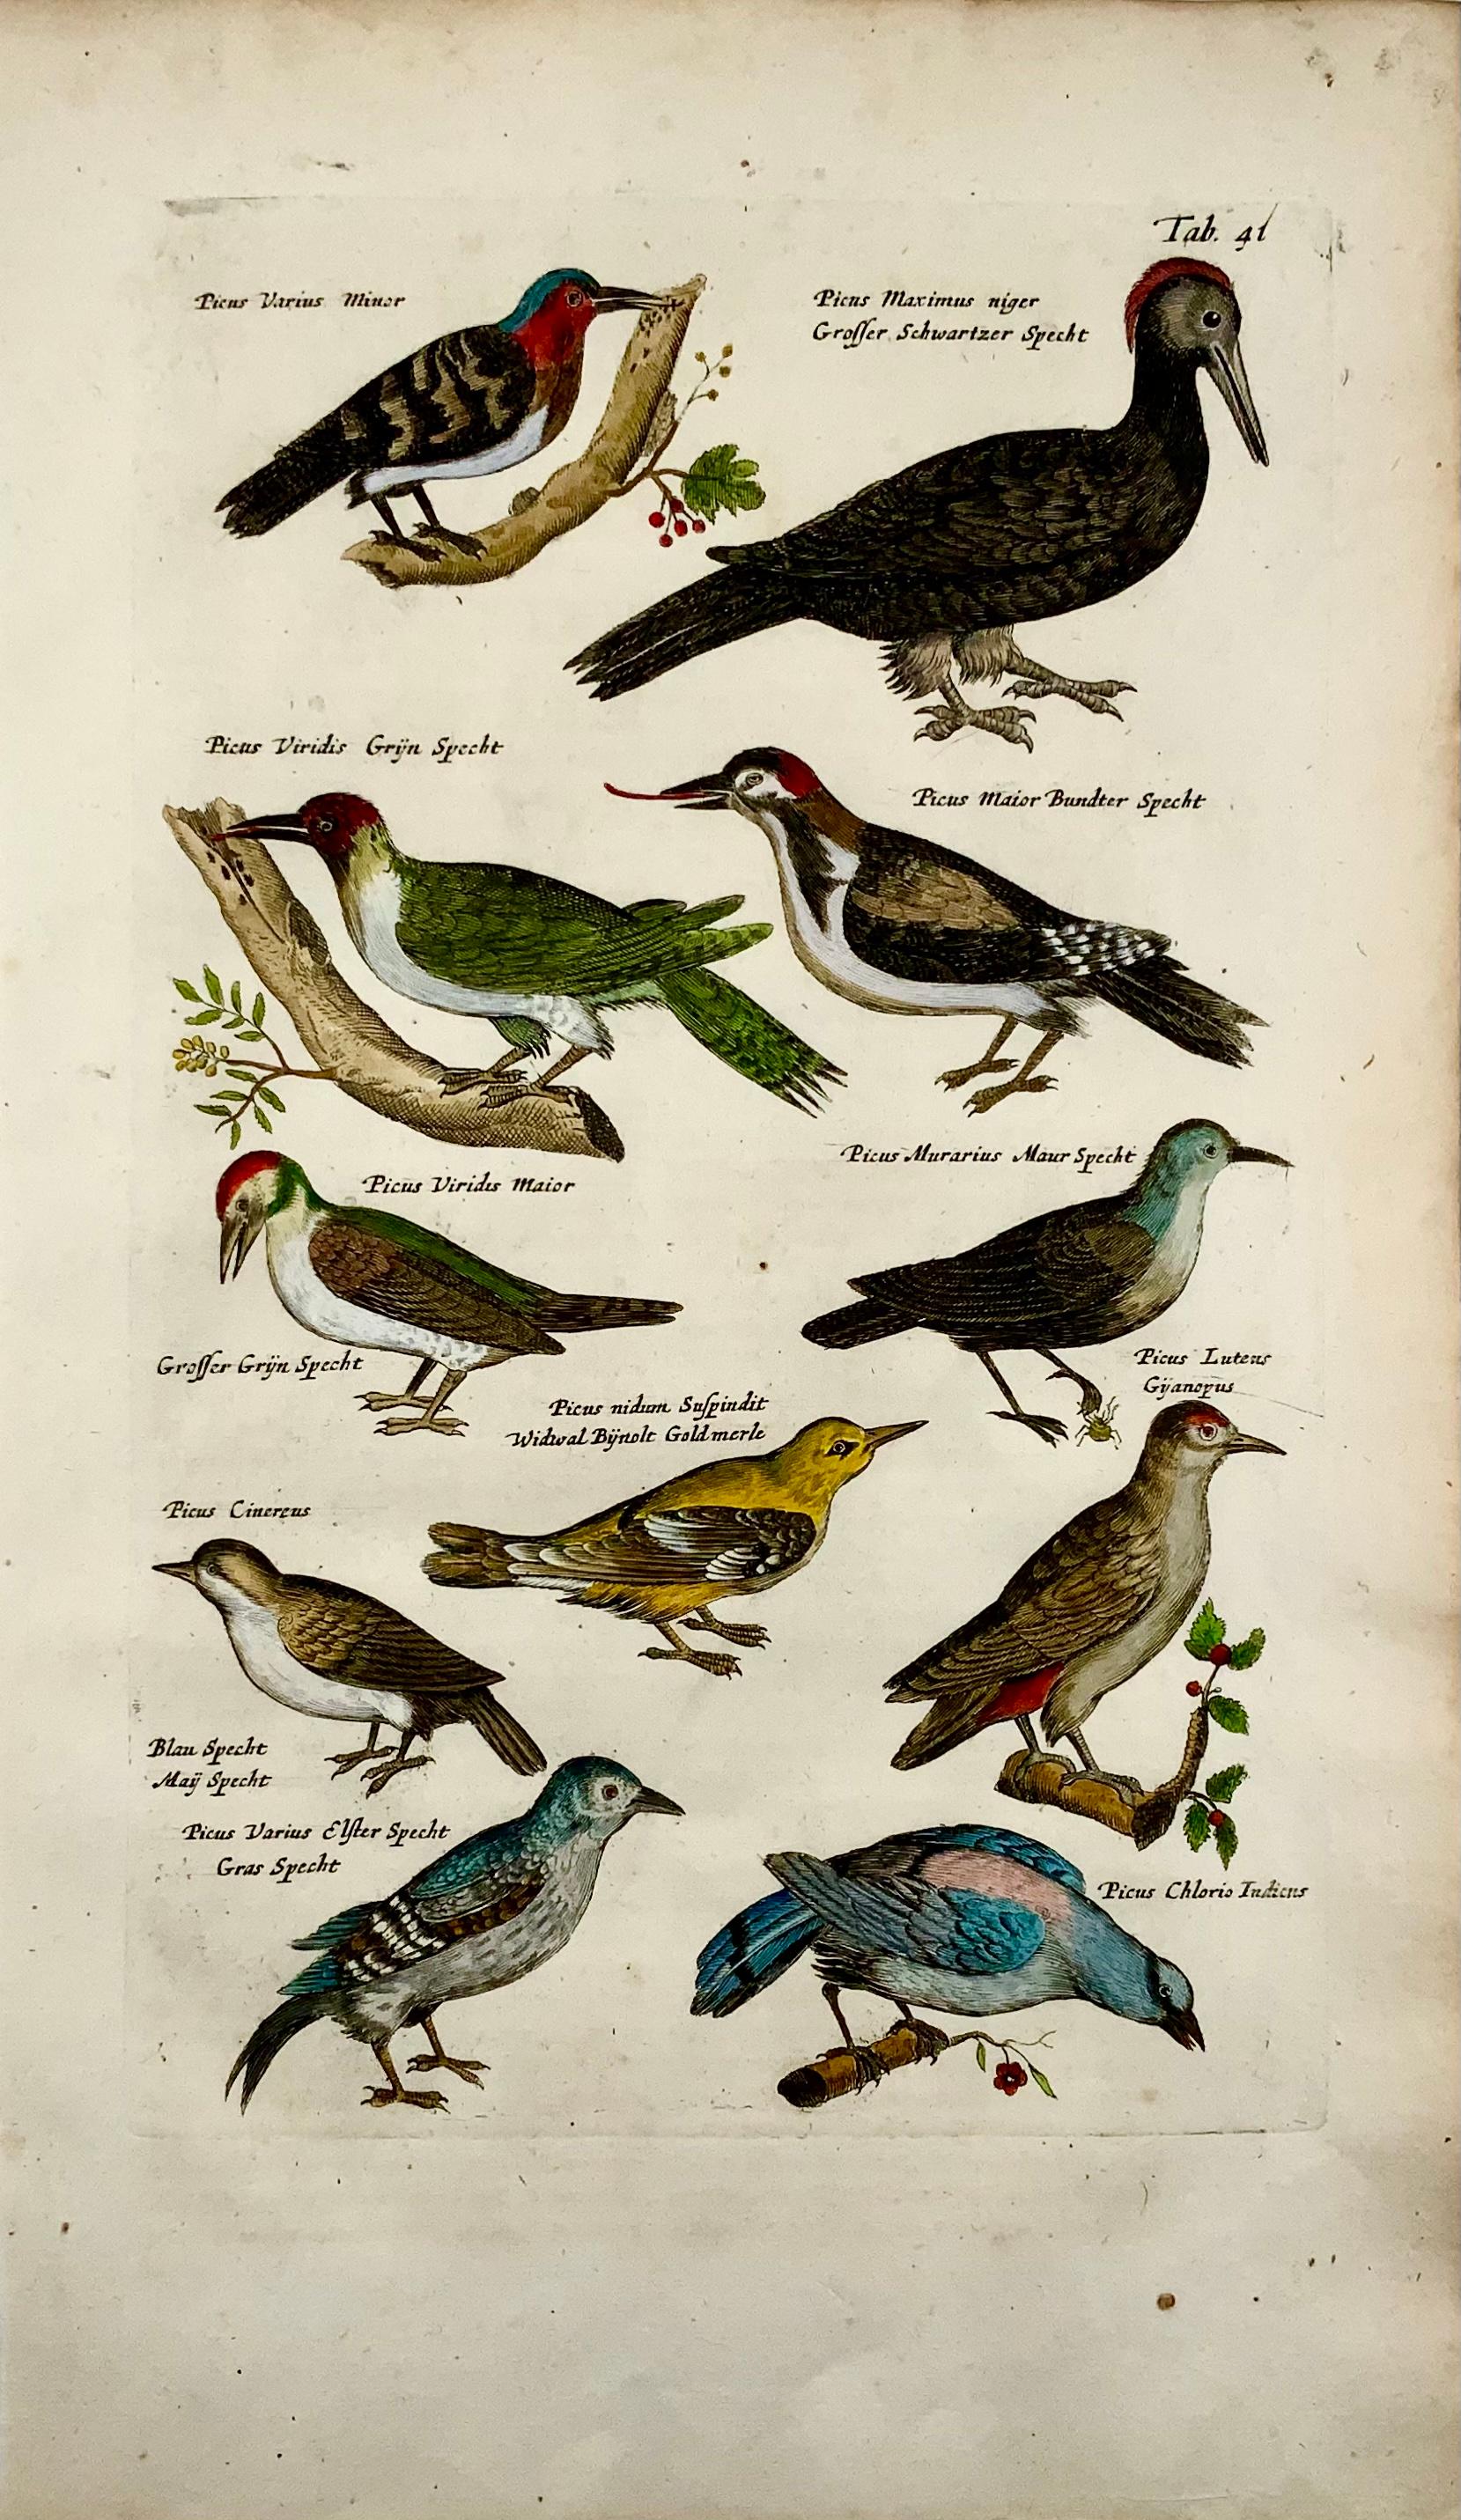 Fine folio engraving in hand color.

This rare antique engraving was published in the series: 'Historiae Naturalis De Avibus Libri VI' by John Johnston, published and engraved by Matthias Merian in 1657.

Matthaus Merian was from a long lineage